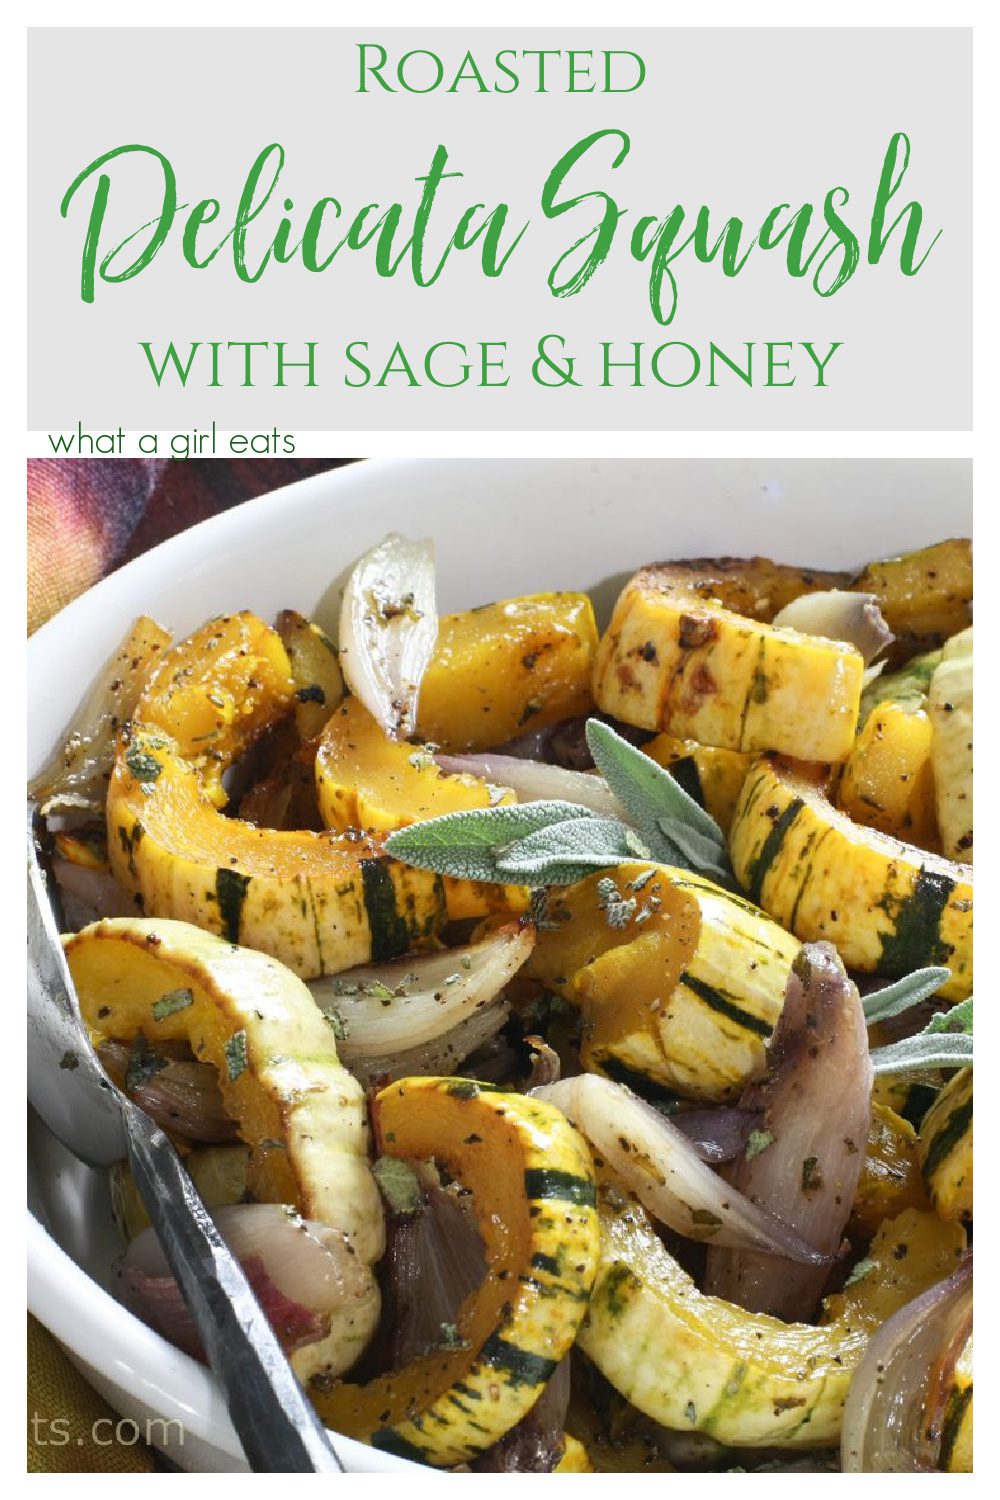 Delicata squash with honey and sage is a delicious side dish.This Ina Garten recipe has minimal ingredients and is the prefect accompaniment to any autumn meal.